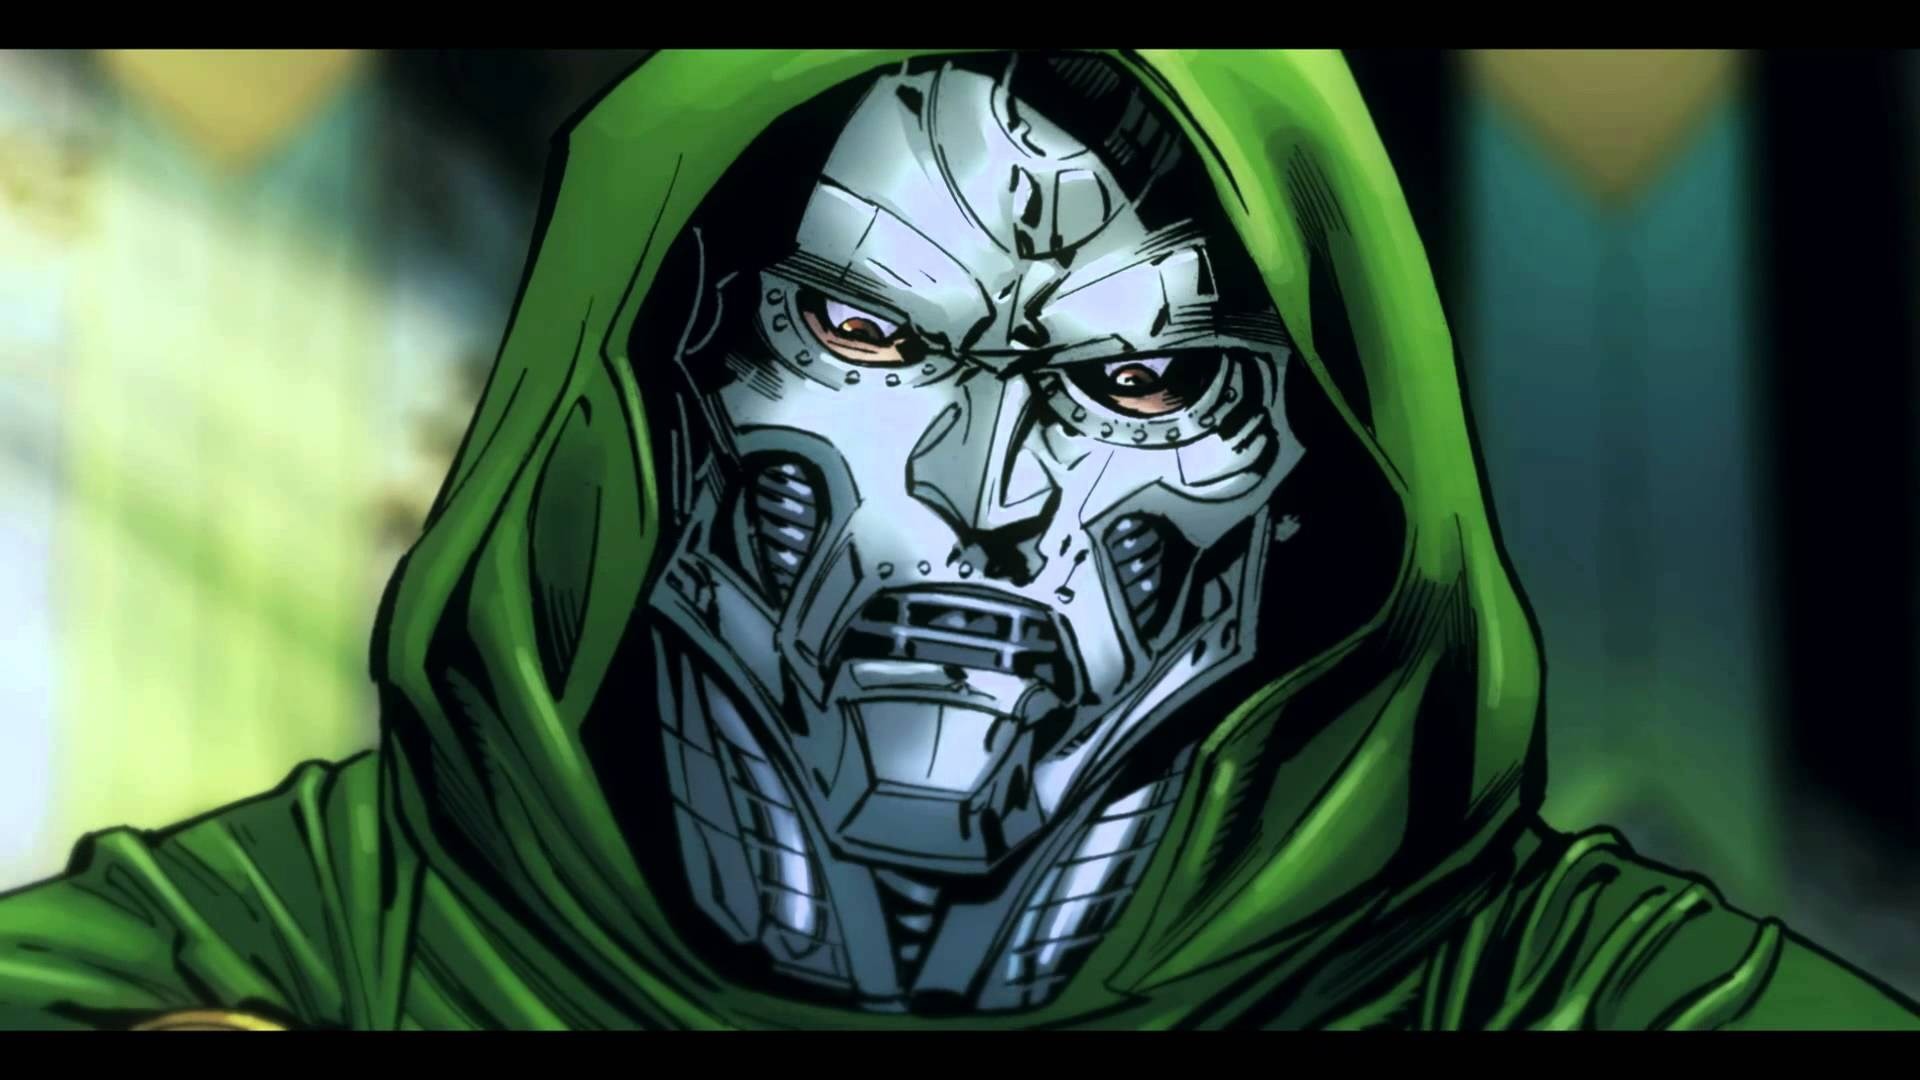 1920x1080  px Quality Cool doctor doom wallpaper by Hilton Brook for : NS.com